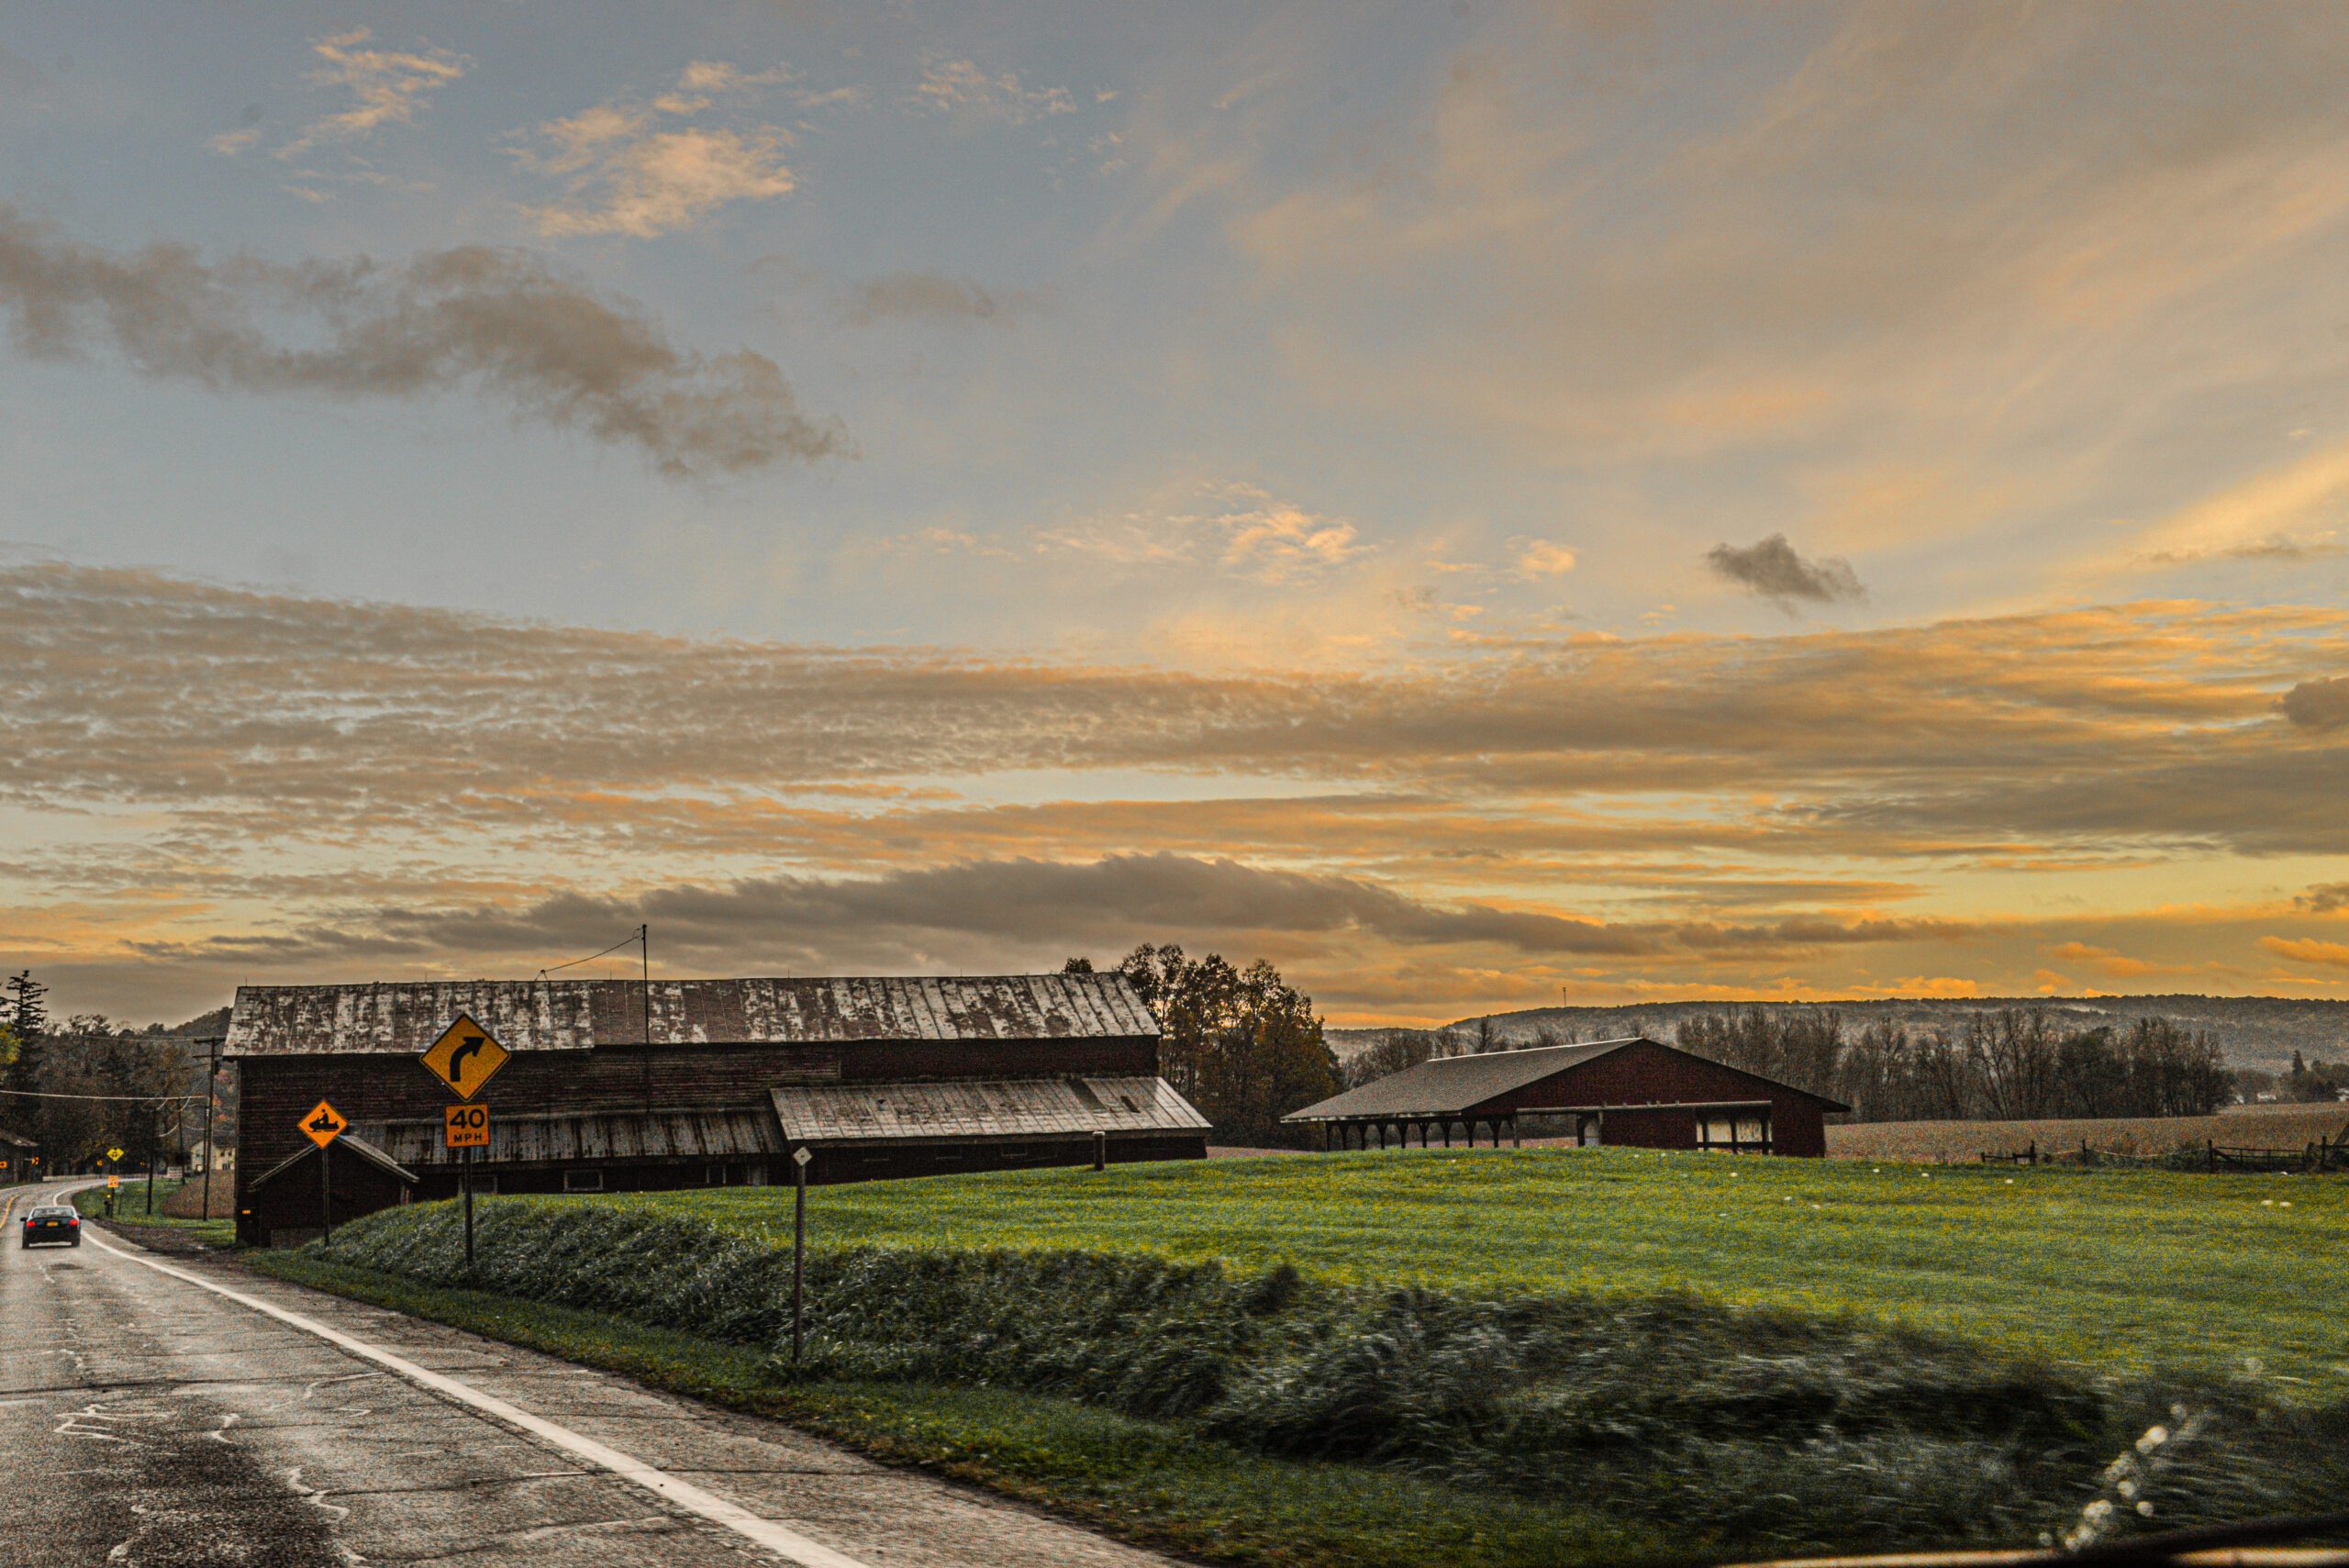 Beutiful sunset over rural highway with Barns on side of blue highway by Franklin Crawford